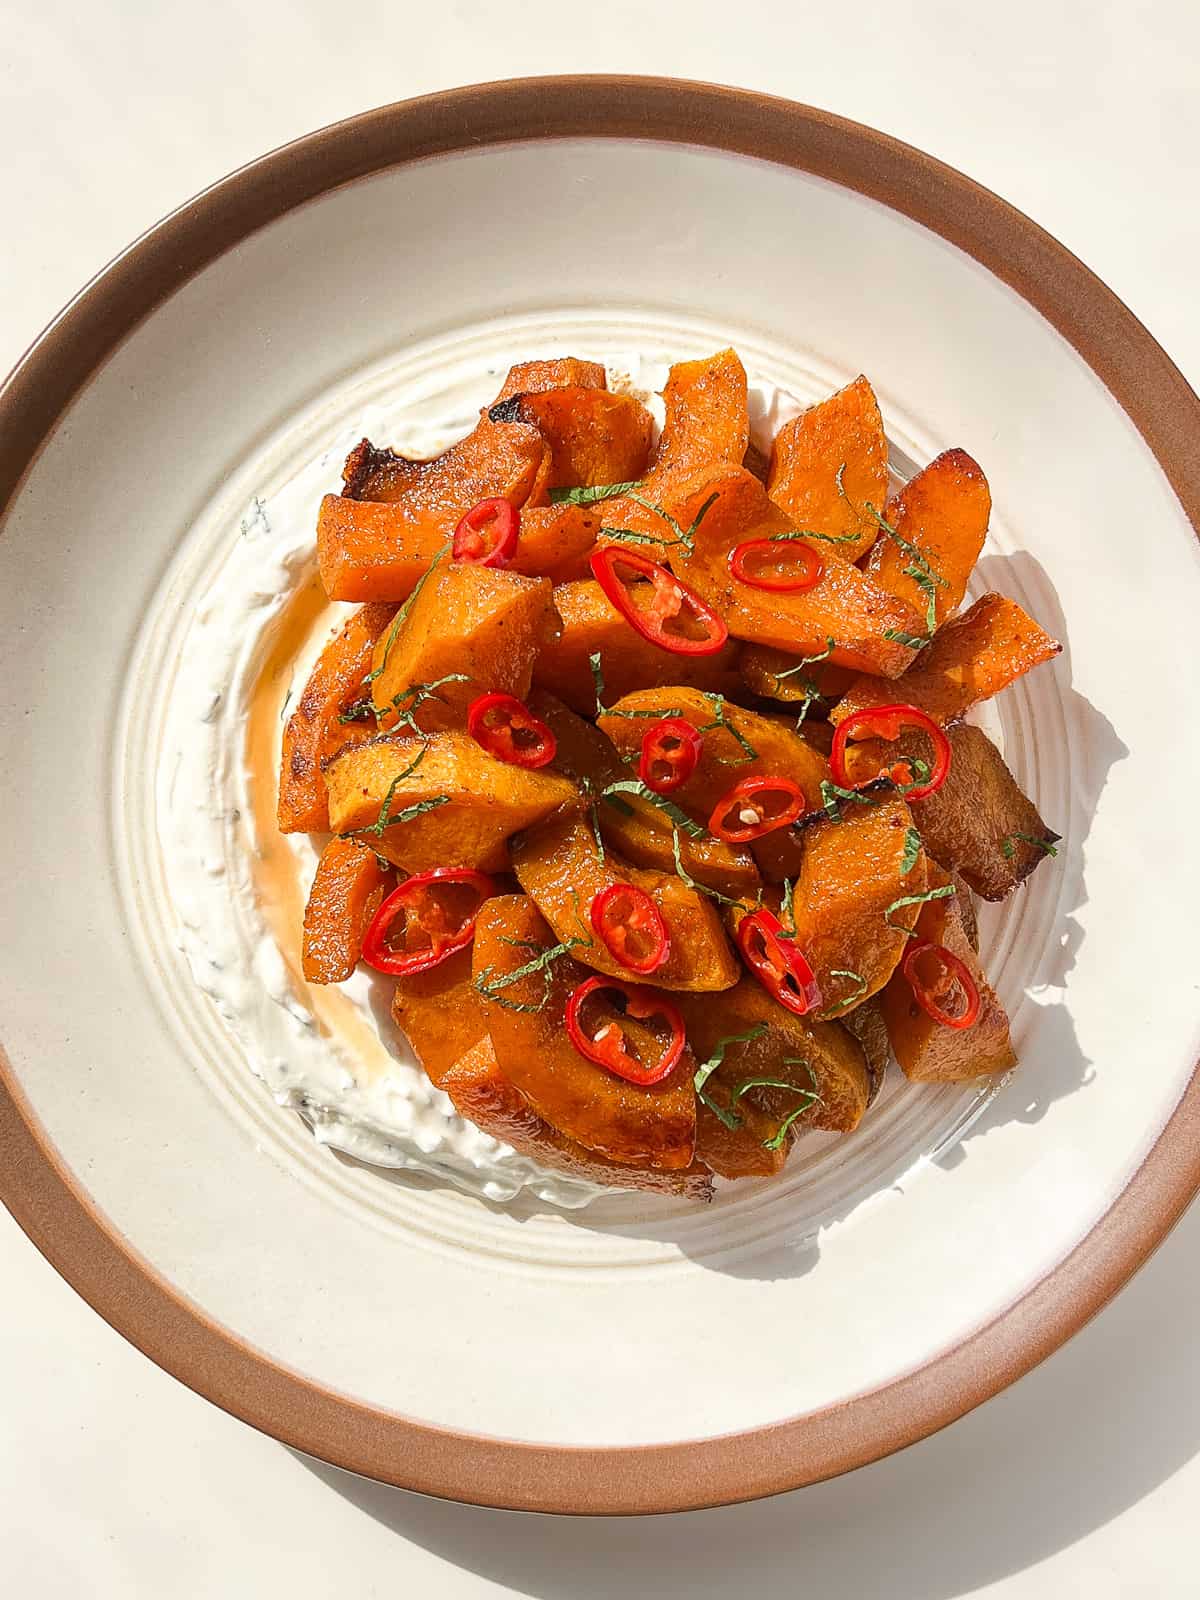 An image of Roasted squash with warm spices, pickled chilies, and lemon mint labneh on a white ceramic plate against a white background.